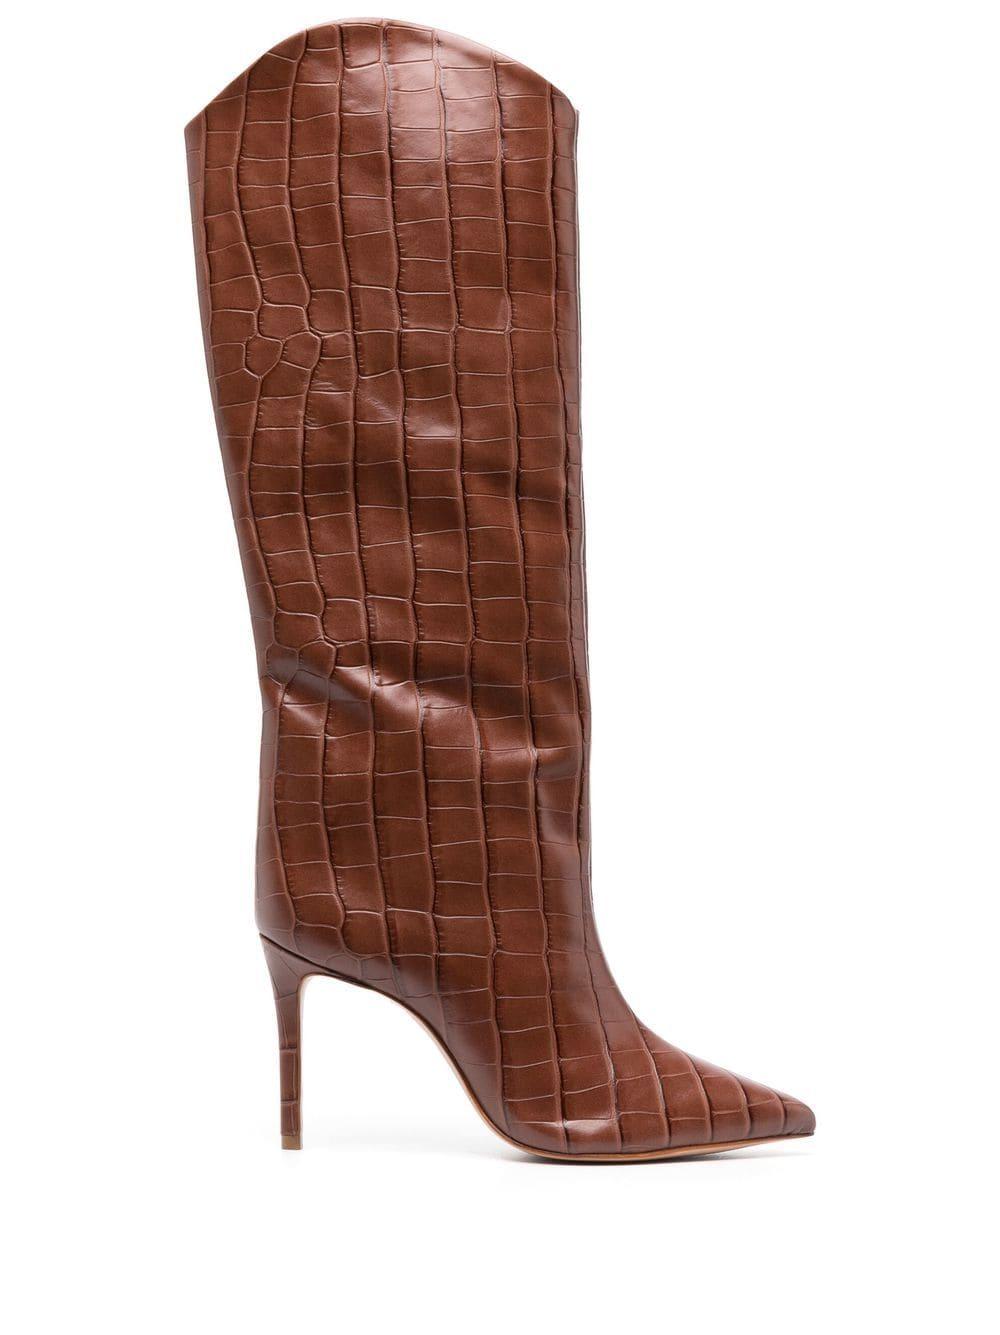 SCHUTZ SHOES Maryana 90mm Croc-embossed Stiletto Boots in Brown | Lyst